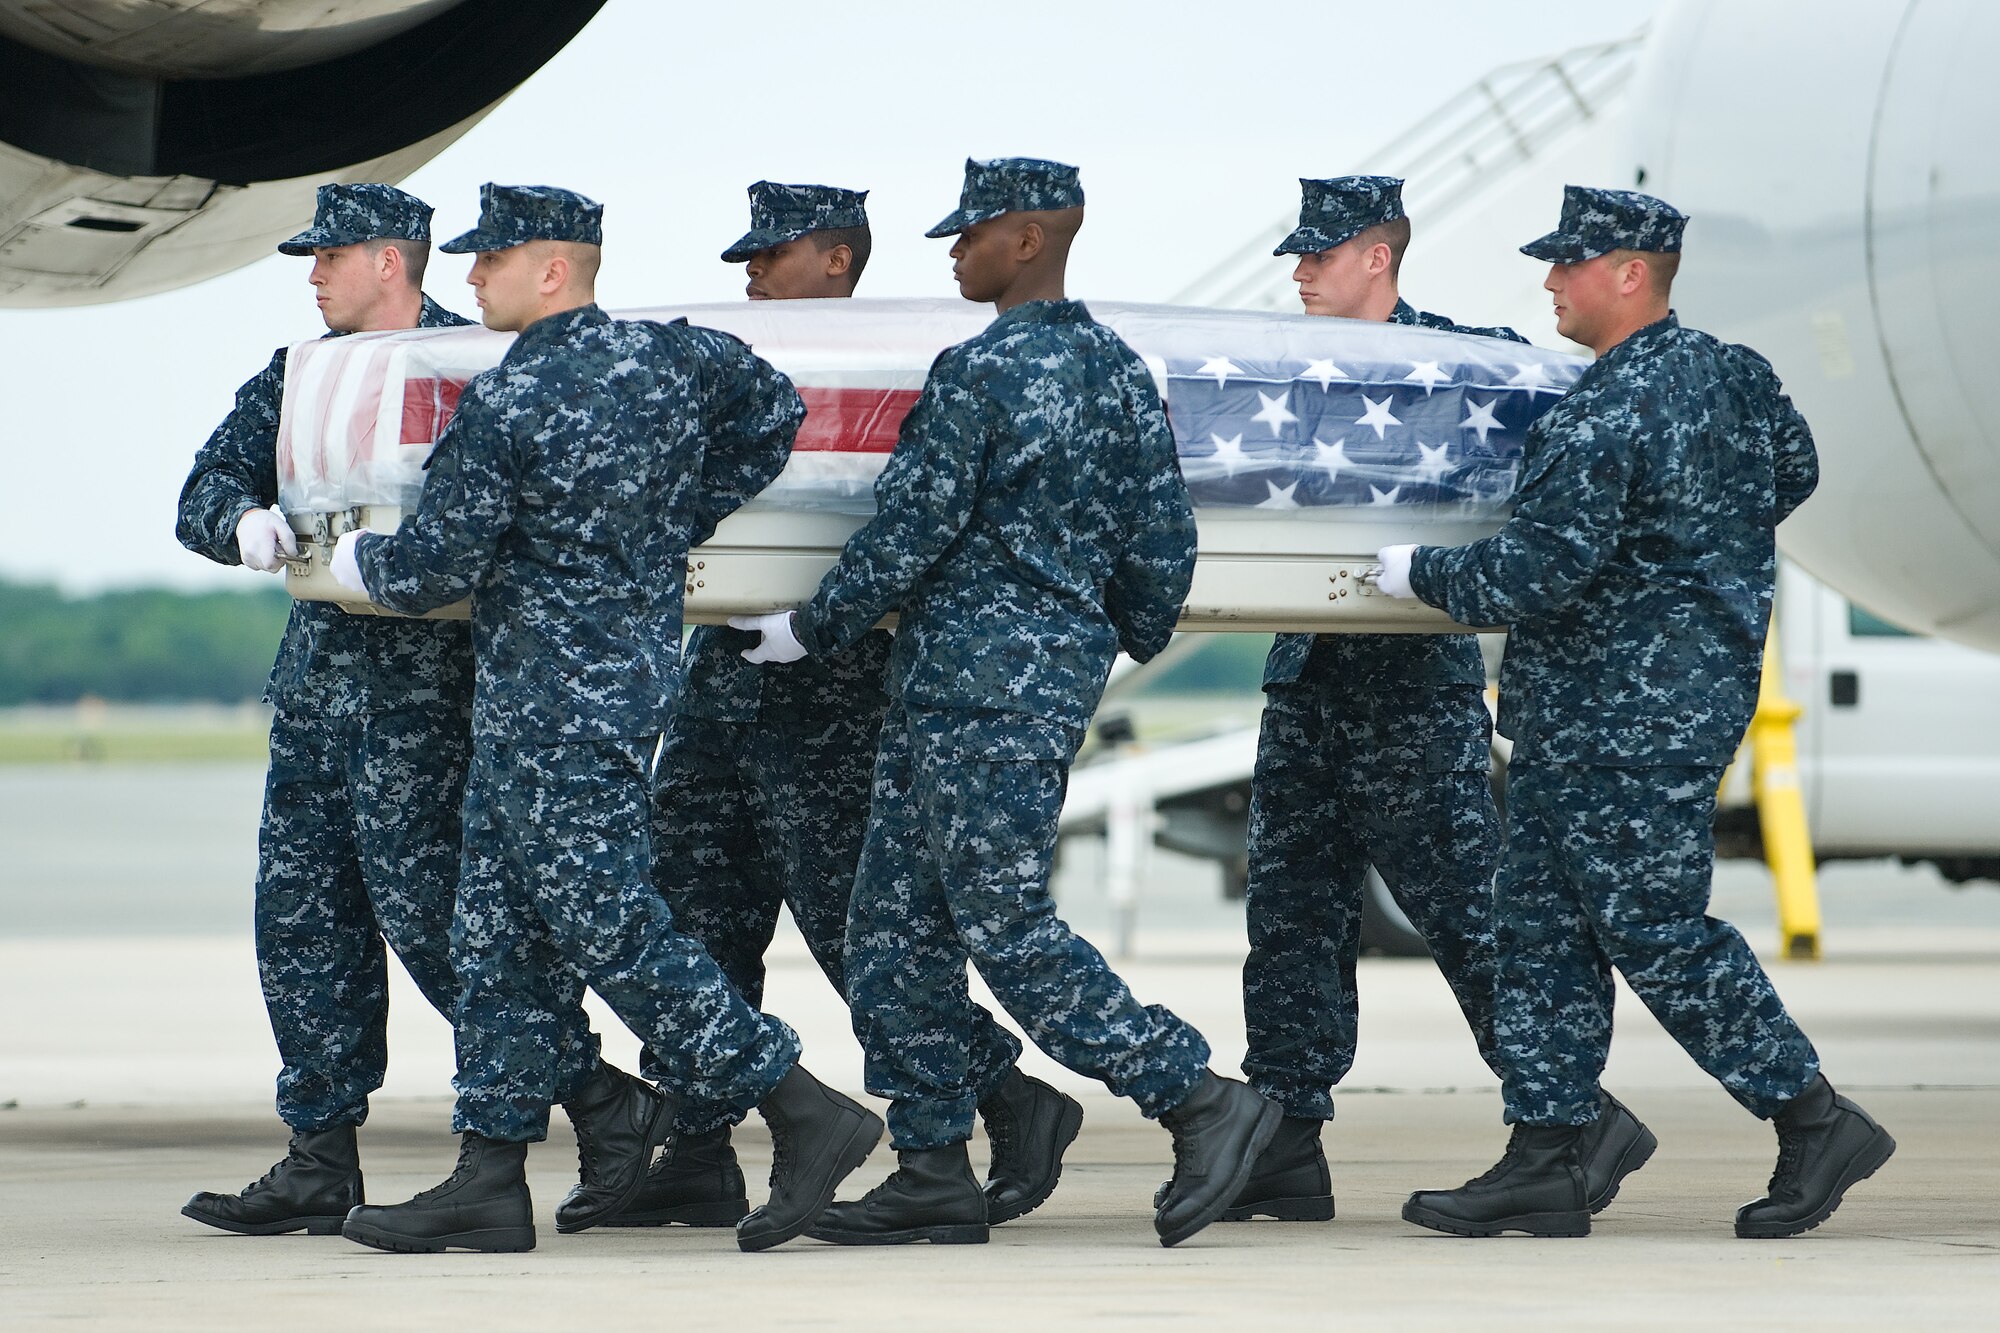 A U.S. Navy team transfers the remains of Navy Petty Officer 3rd Class Zarian A. Wood, of Houston, Texas, at Dover Air Force Base, Del., May 17. Petty Officer Wood was assigned as a hospital corpsman to Third Battalion, First Marine Regiment, First Marine Division, I Marine Expeditionary Force. (U.S. Air Force photo/Roland Balik)